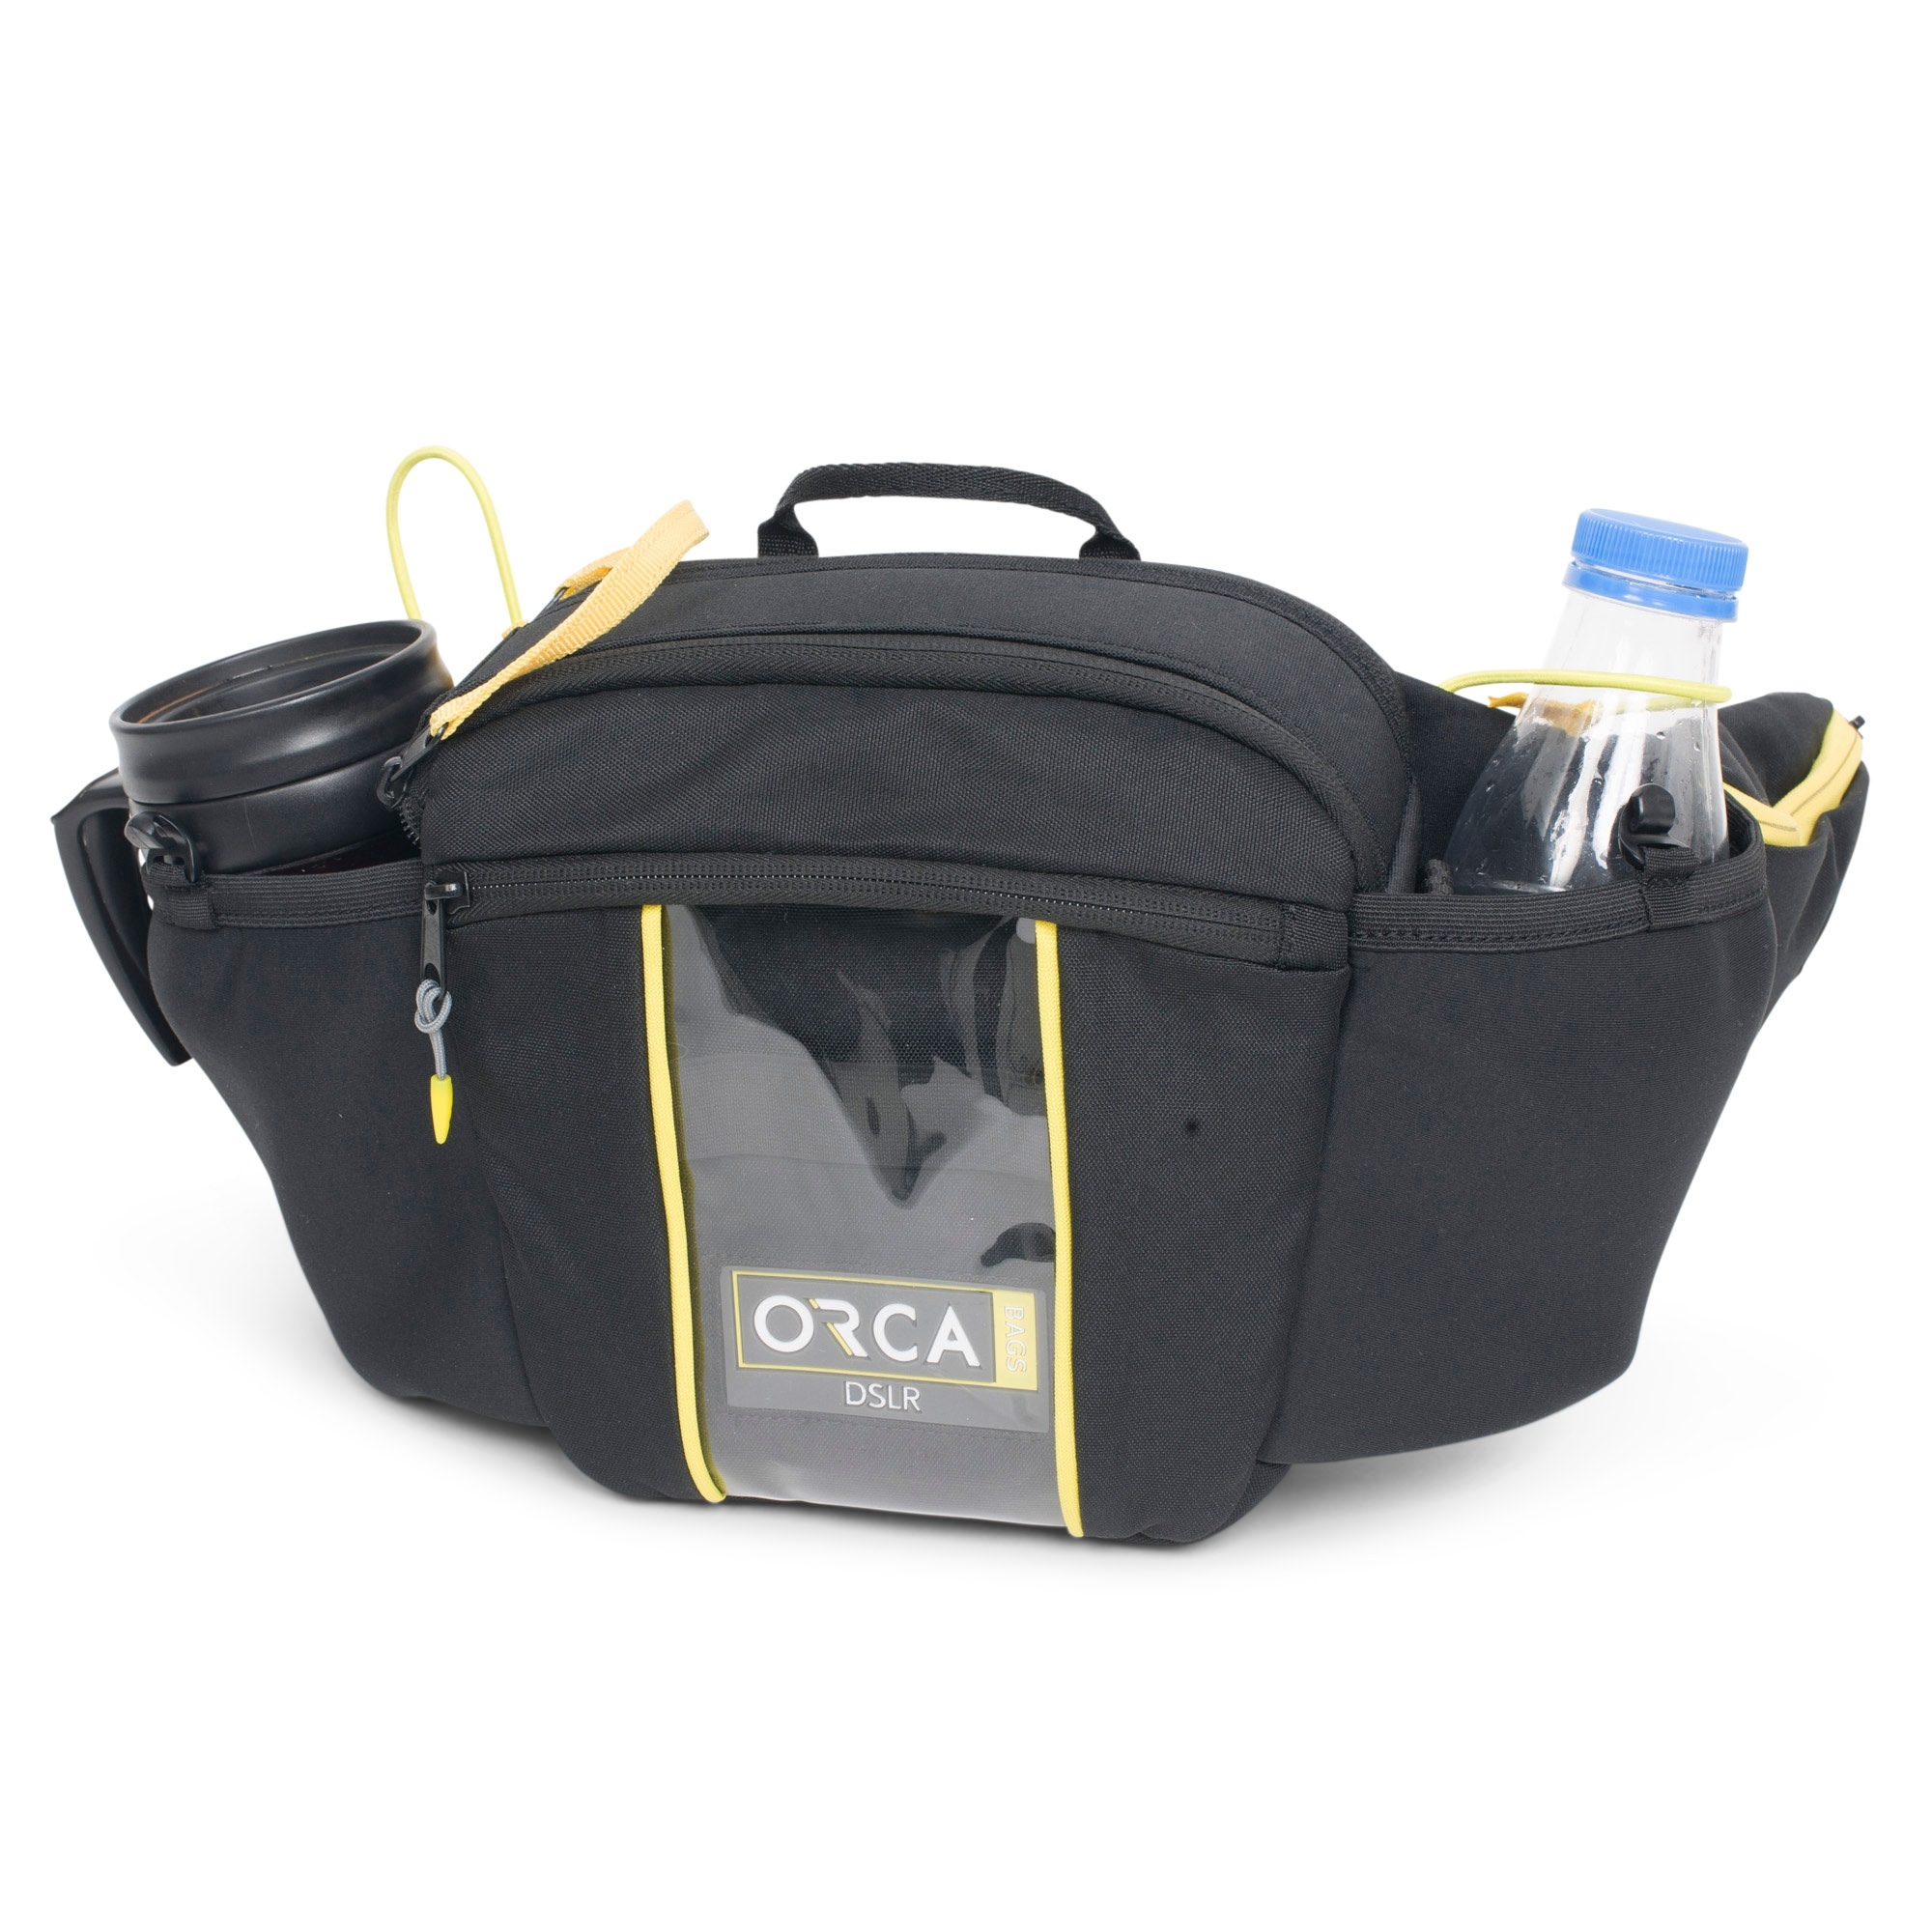 ORCA OR-520 Waist Belt for Mirrorless and DSLR Cameras